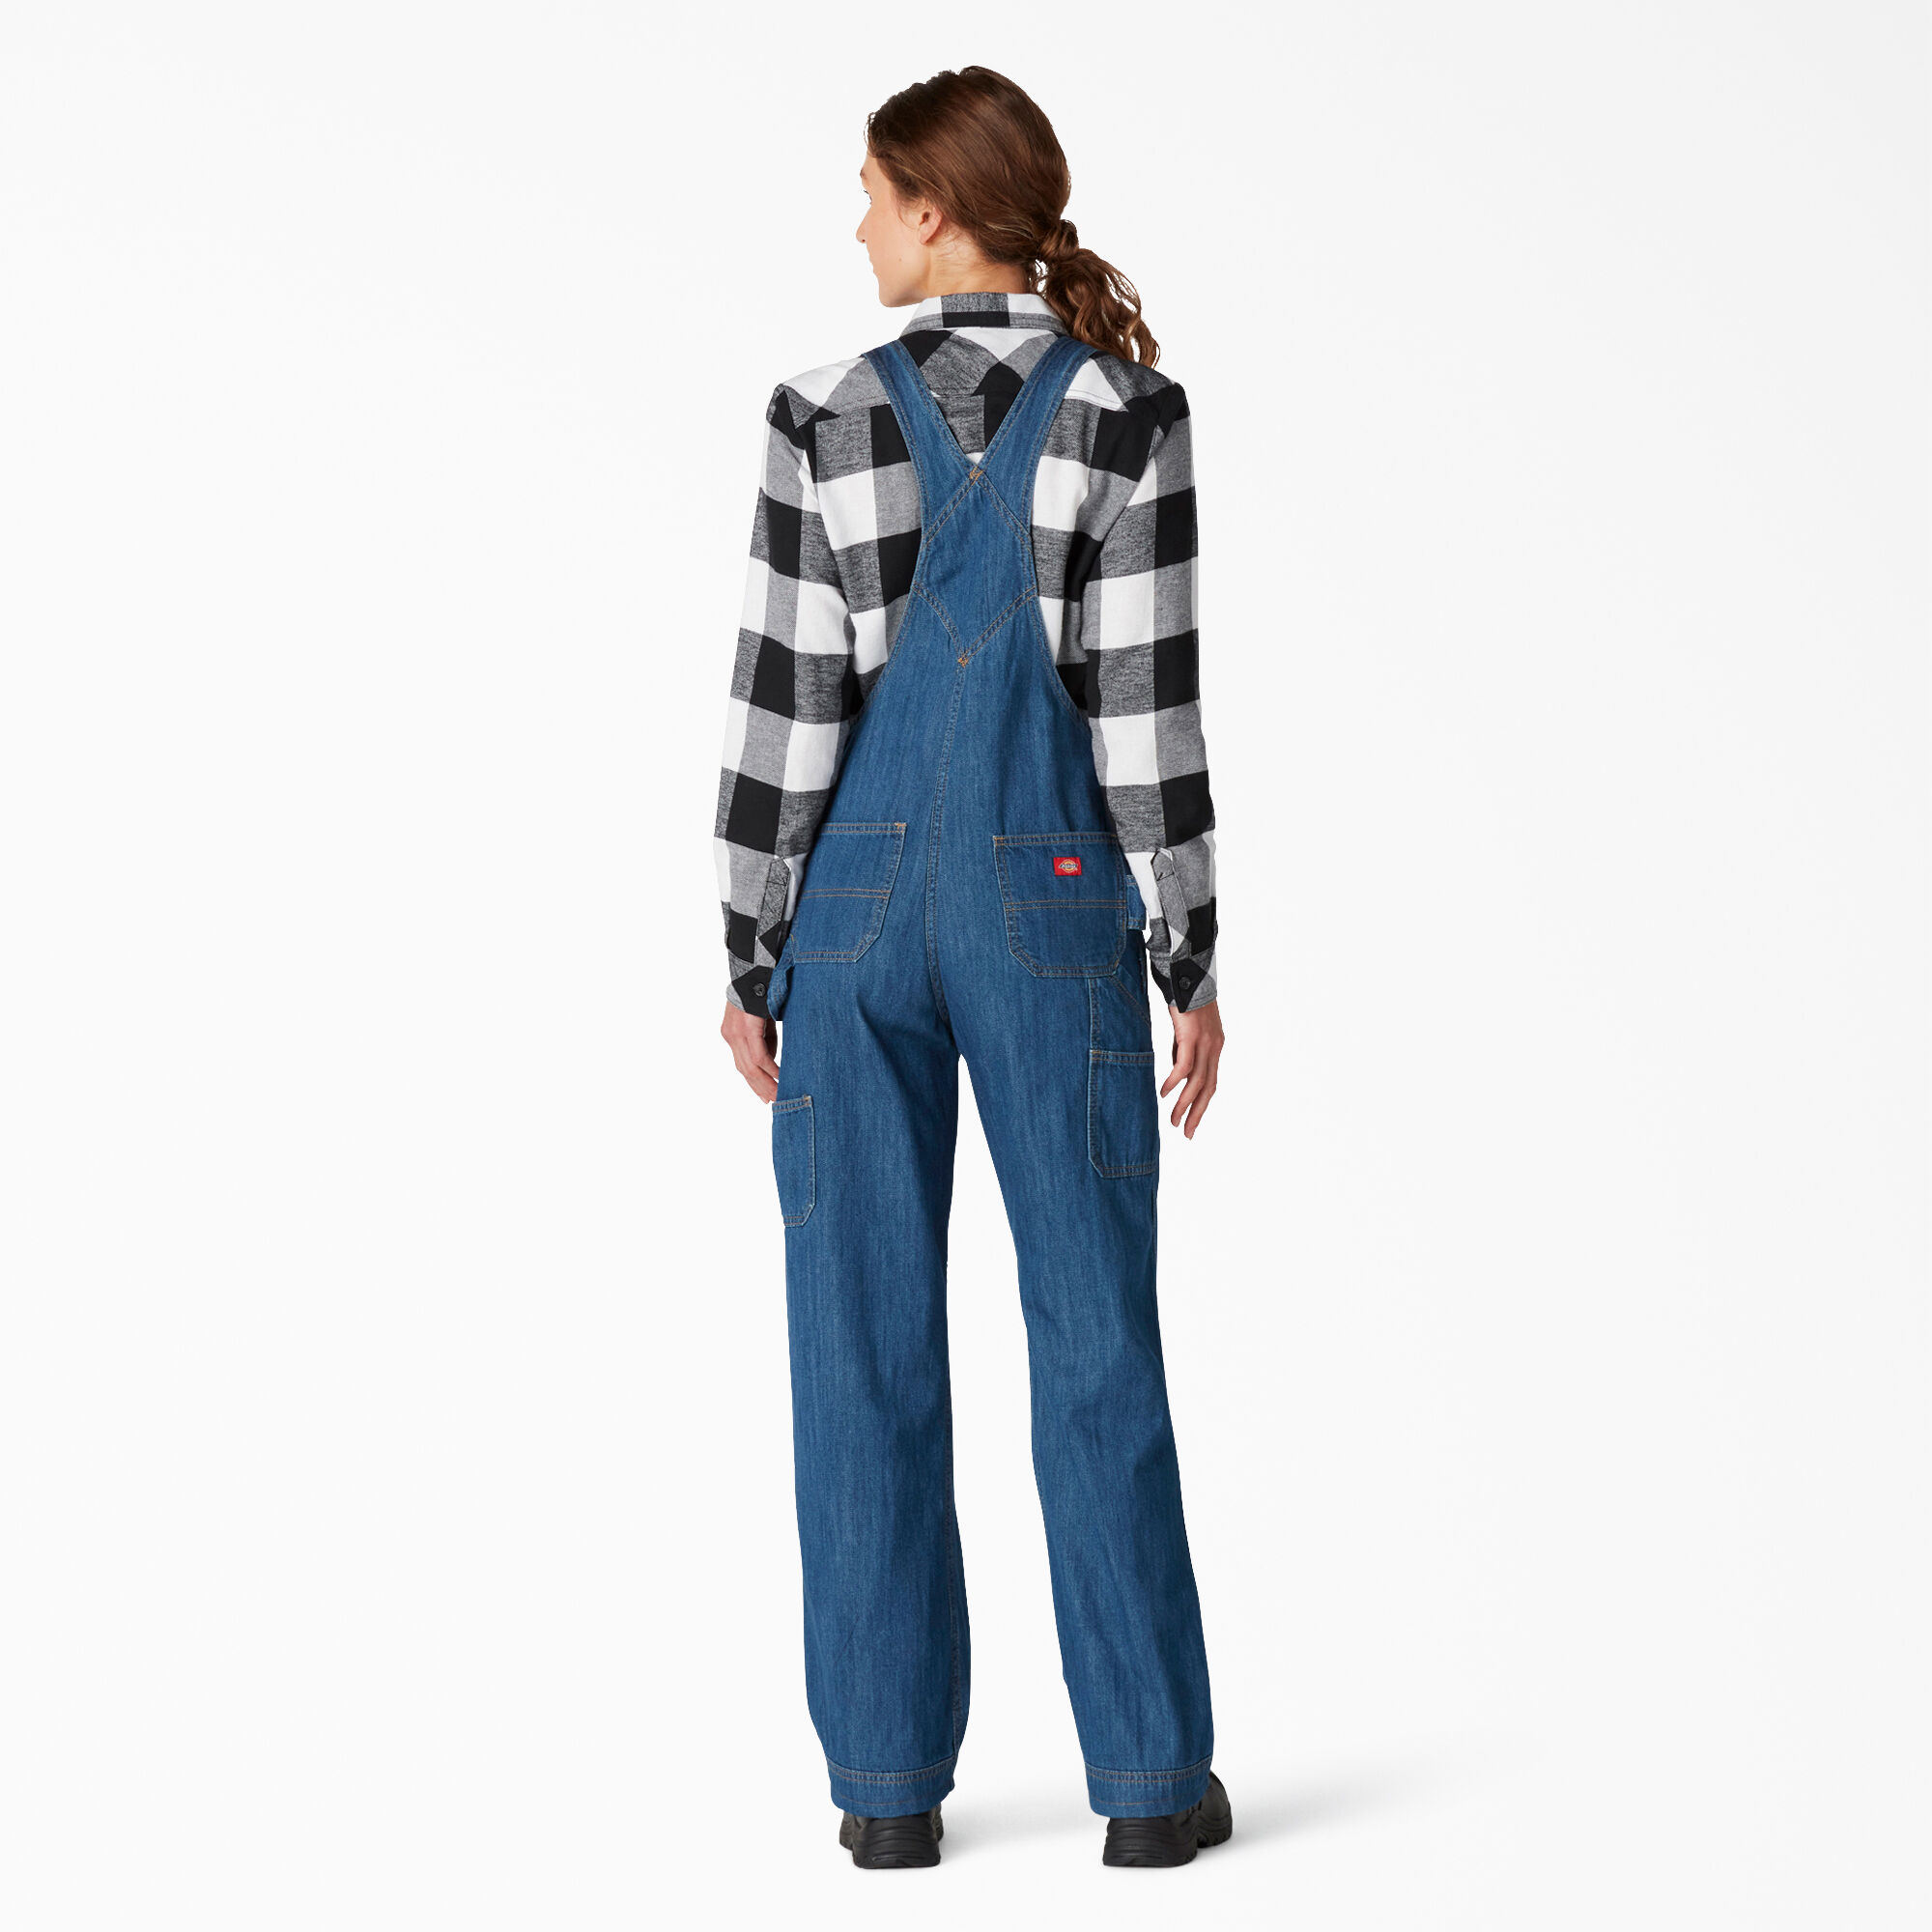 dickies stonewashed overalls